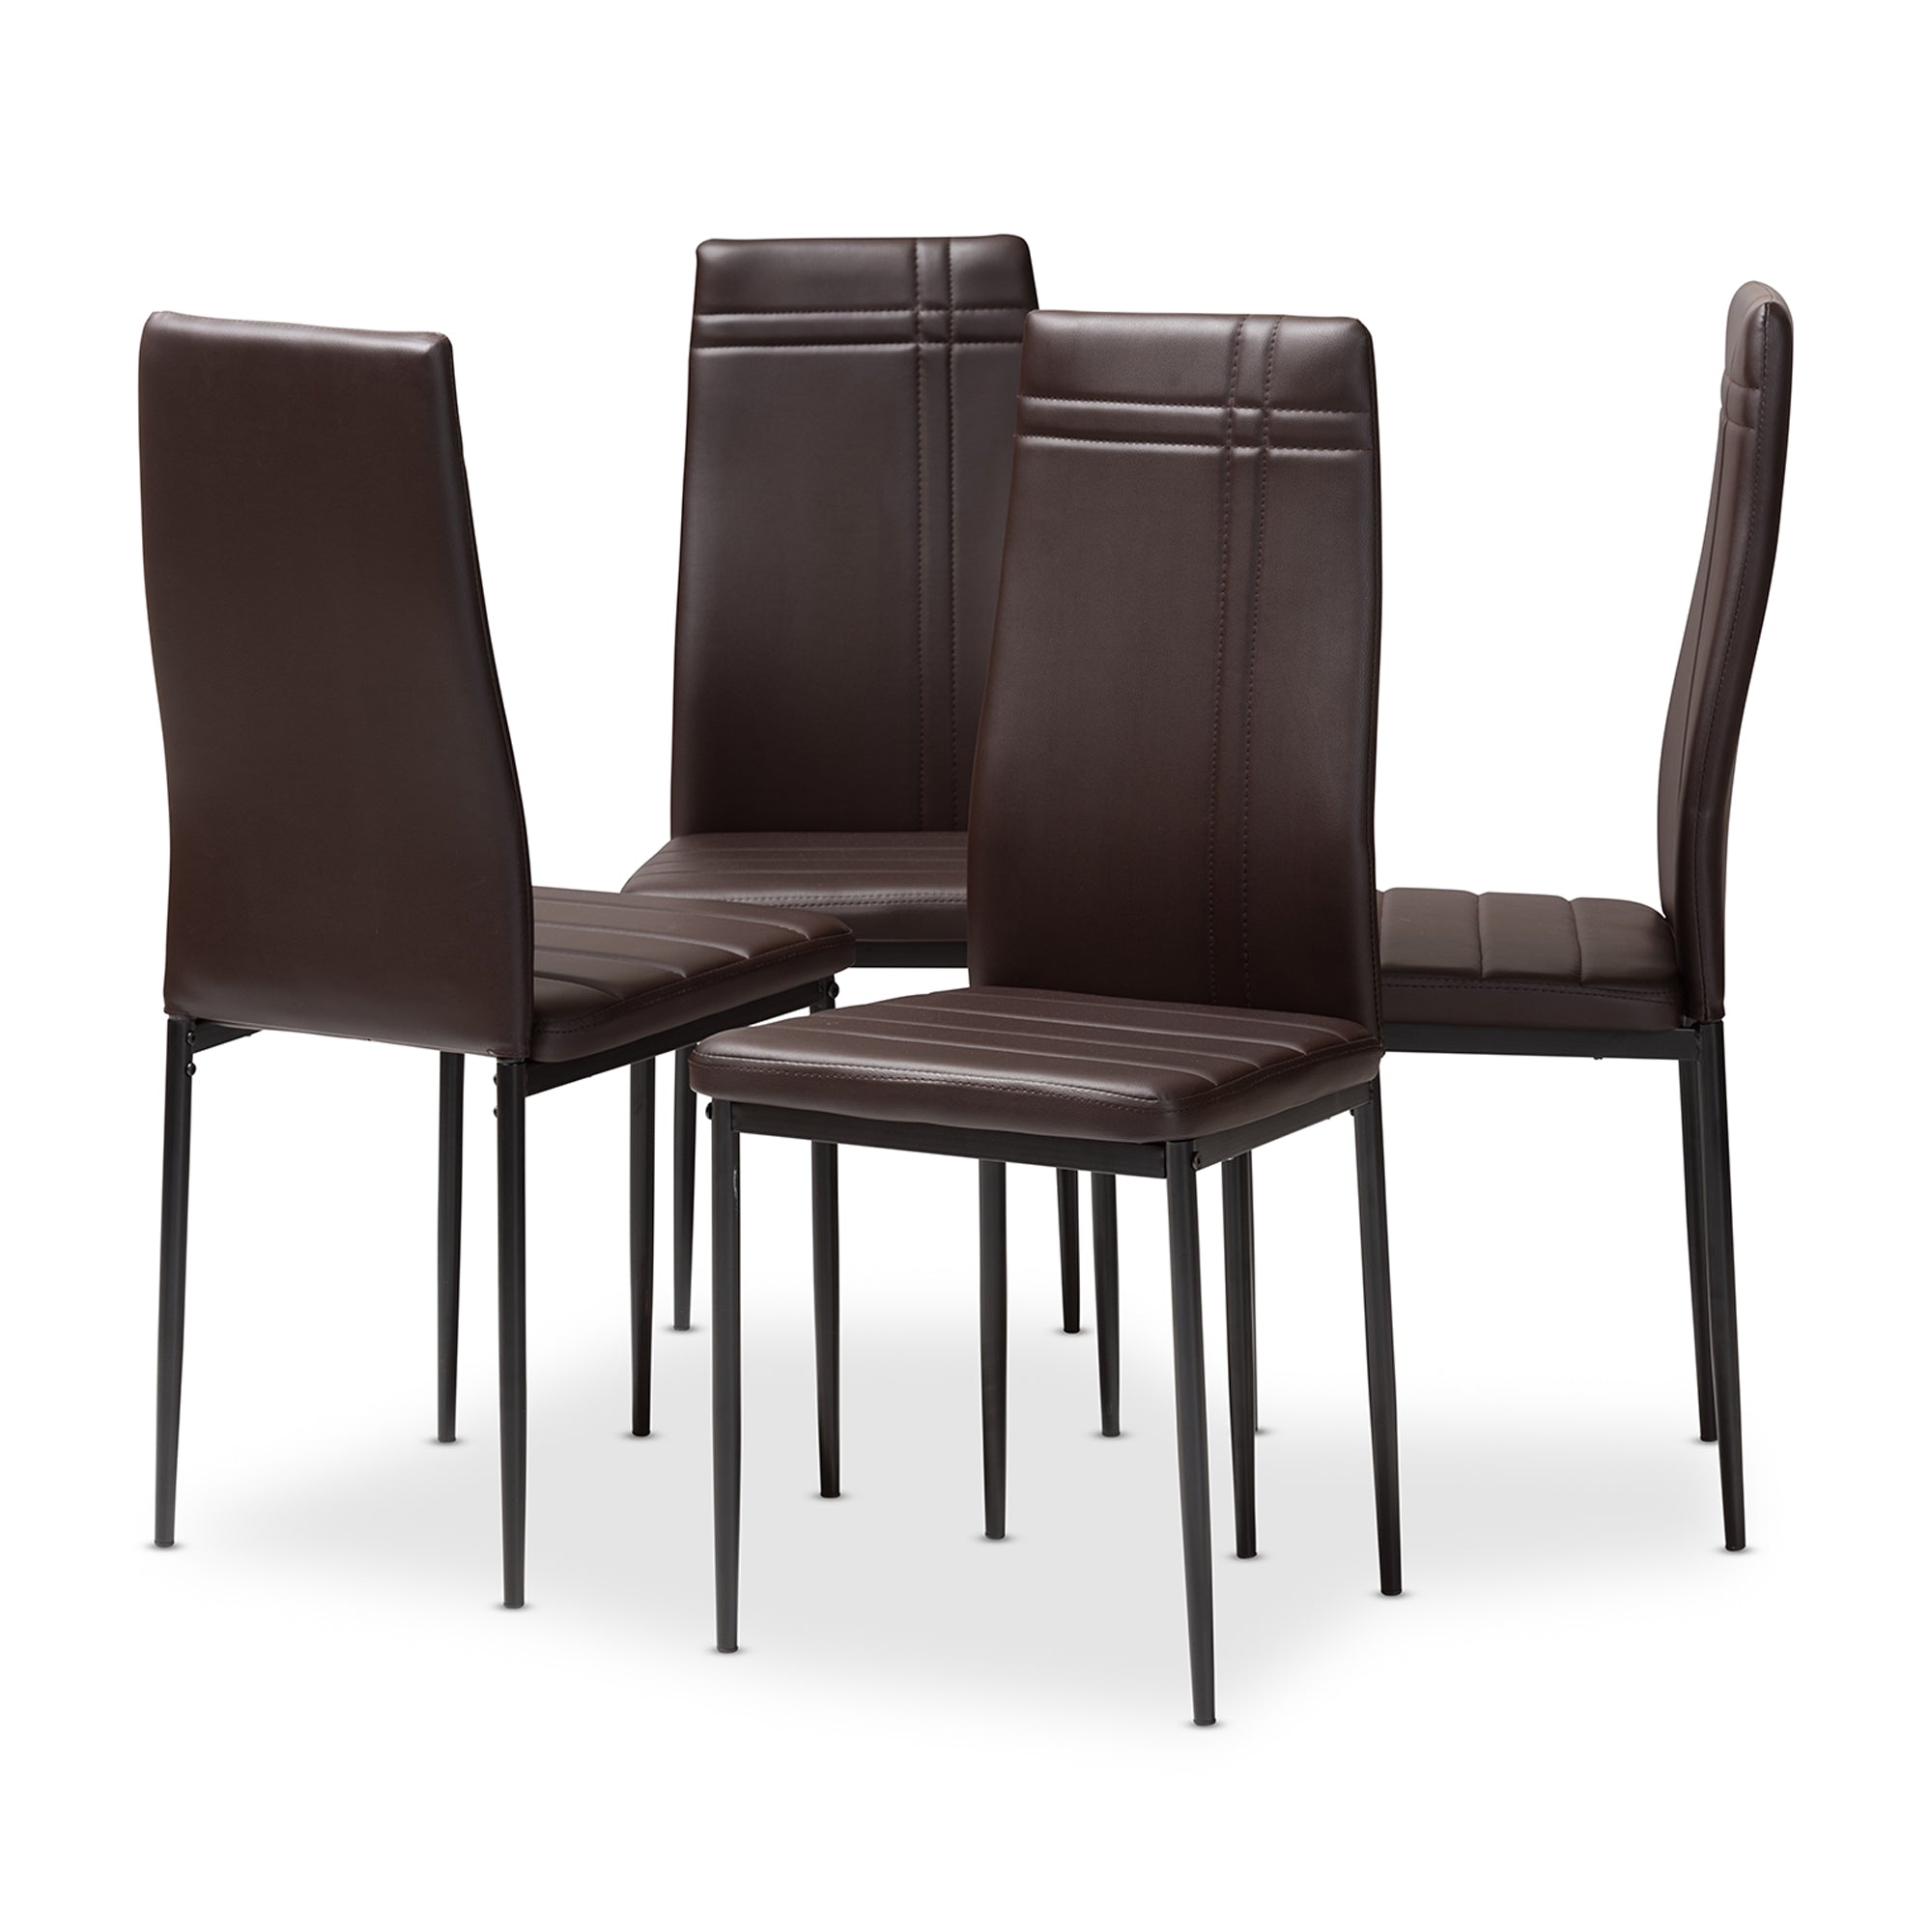 Matiese Modern Dining Chairs Set of 4-Dining Chairs-Baxton Studio - WI-Wall2Wall Furnishings